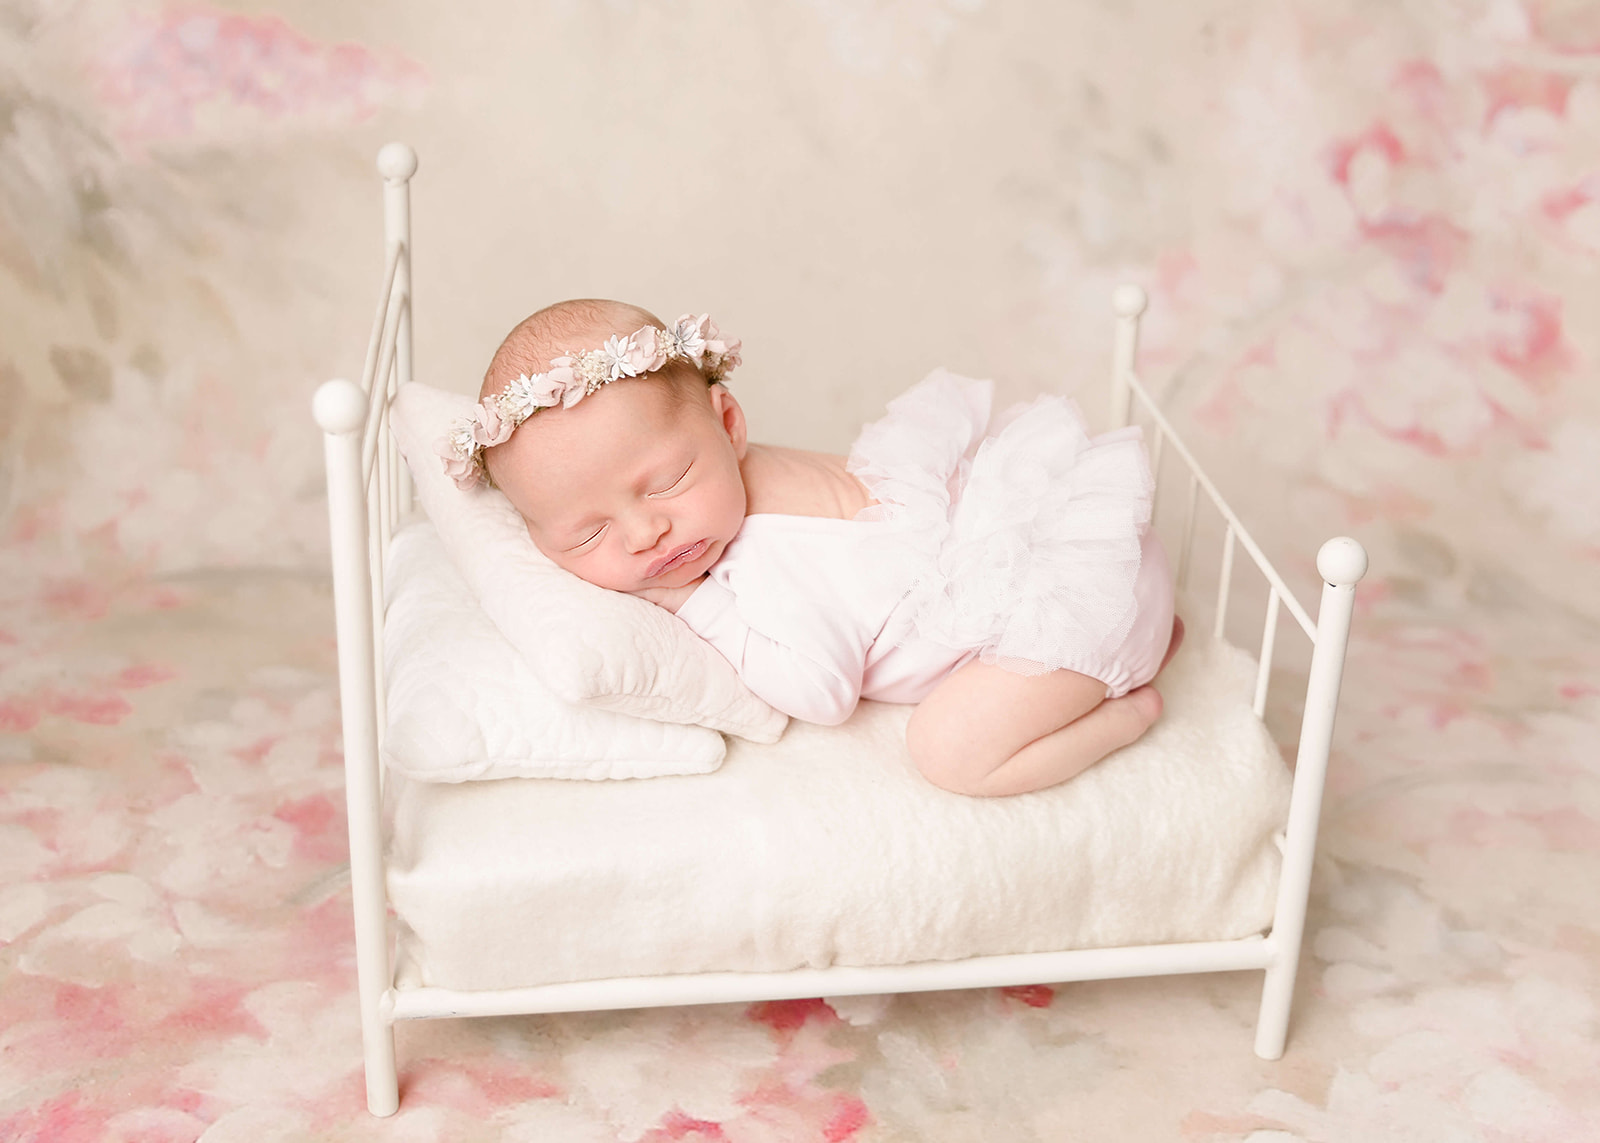 A newborn baby girl sleeps on a tiny white bed surrounded by flowers while wearing a floral headband and a pink tutu Los Angeles Birthing Centers